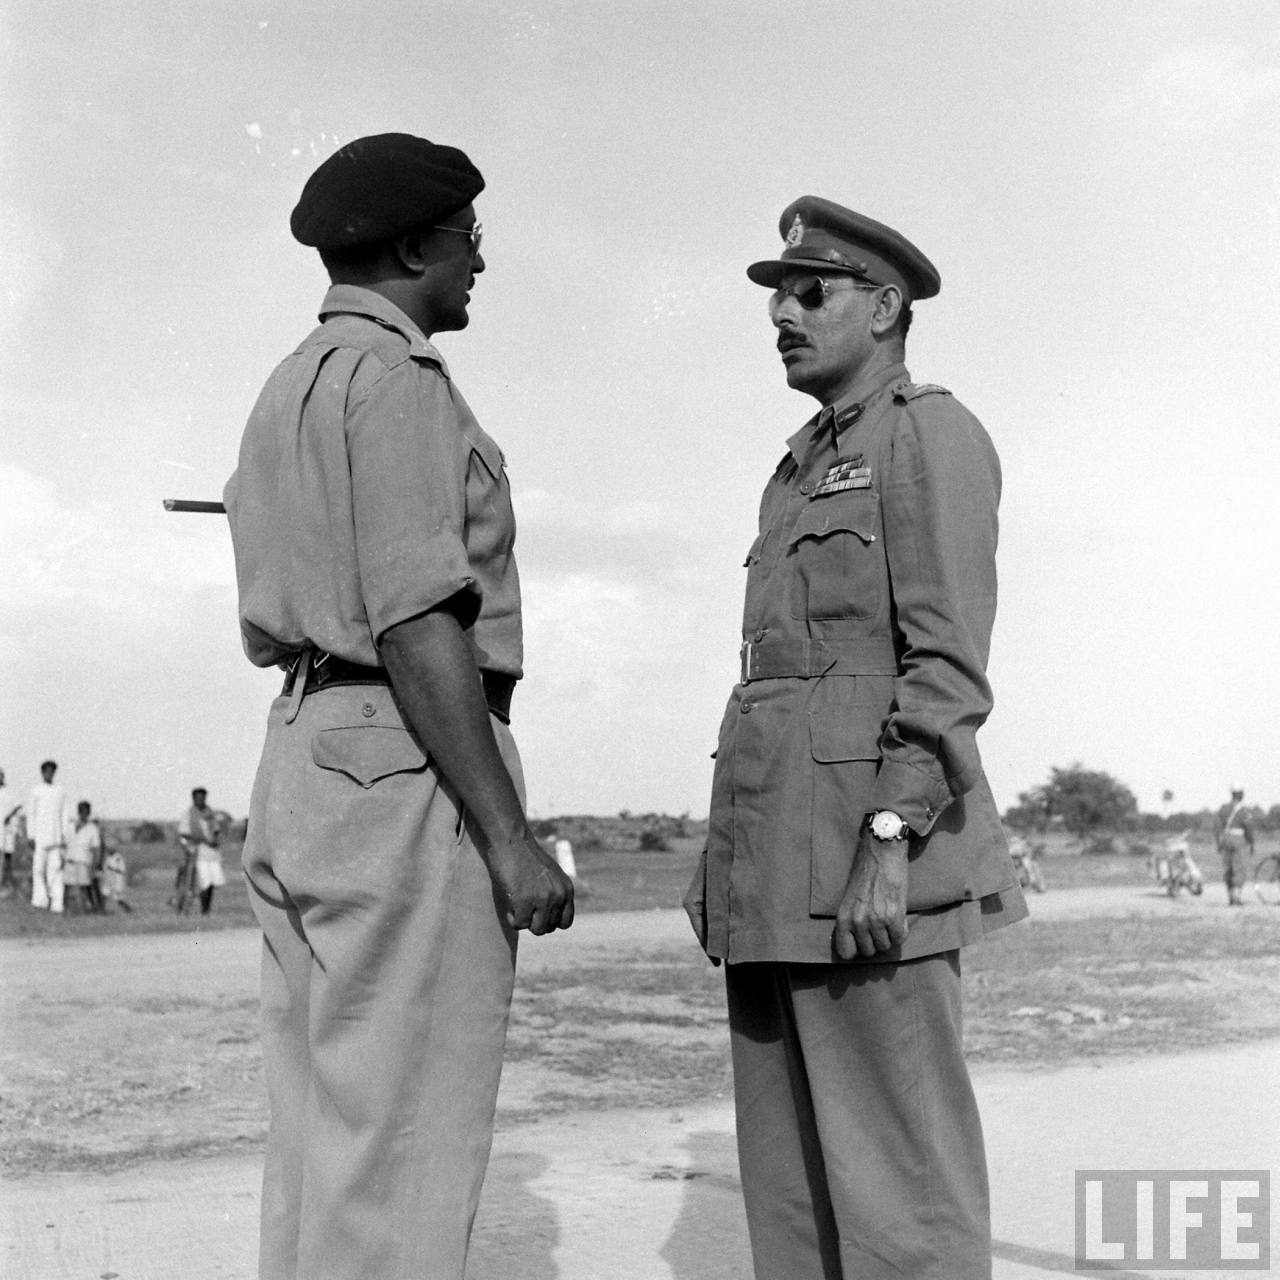 Major General Syed Ahmed El Edroos (at right) offers his surrender of the Hyderabad State Forces to Major General (later General and Army Chief) Joyanto Nath Chaudhuri at Secunderabad | Operation Polo | Hyderabad Police Action | Annexation of Hyderabad, Hyderabad (Deccan), Telangana, India | Rare & Old Vintage Photos of Operation Polo, Hyderabad (Deccan), Telangana, India (1948)